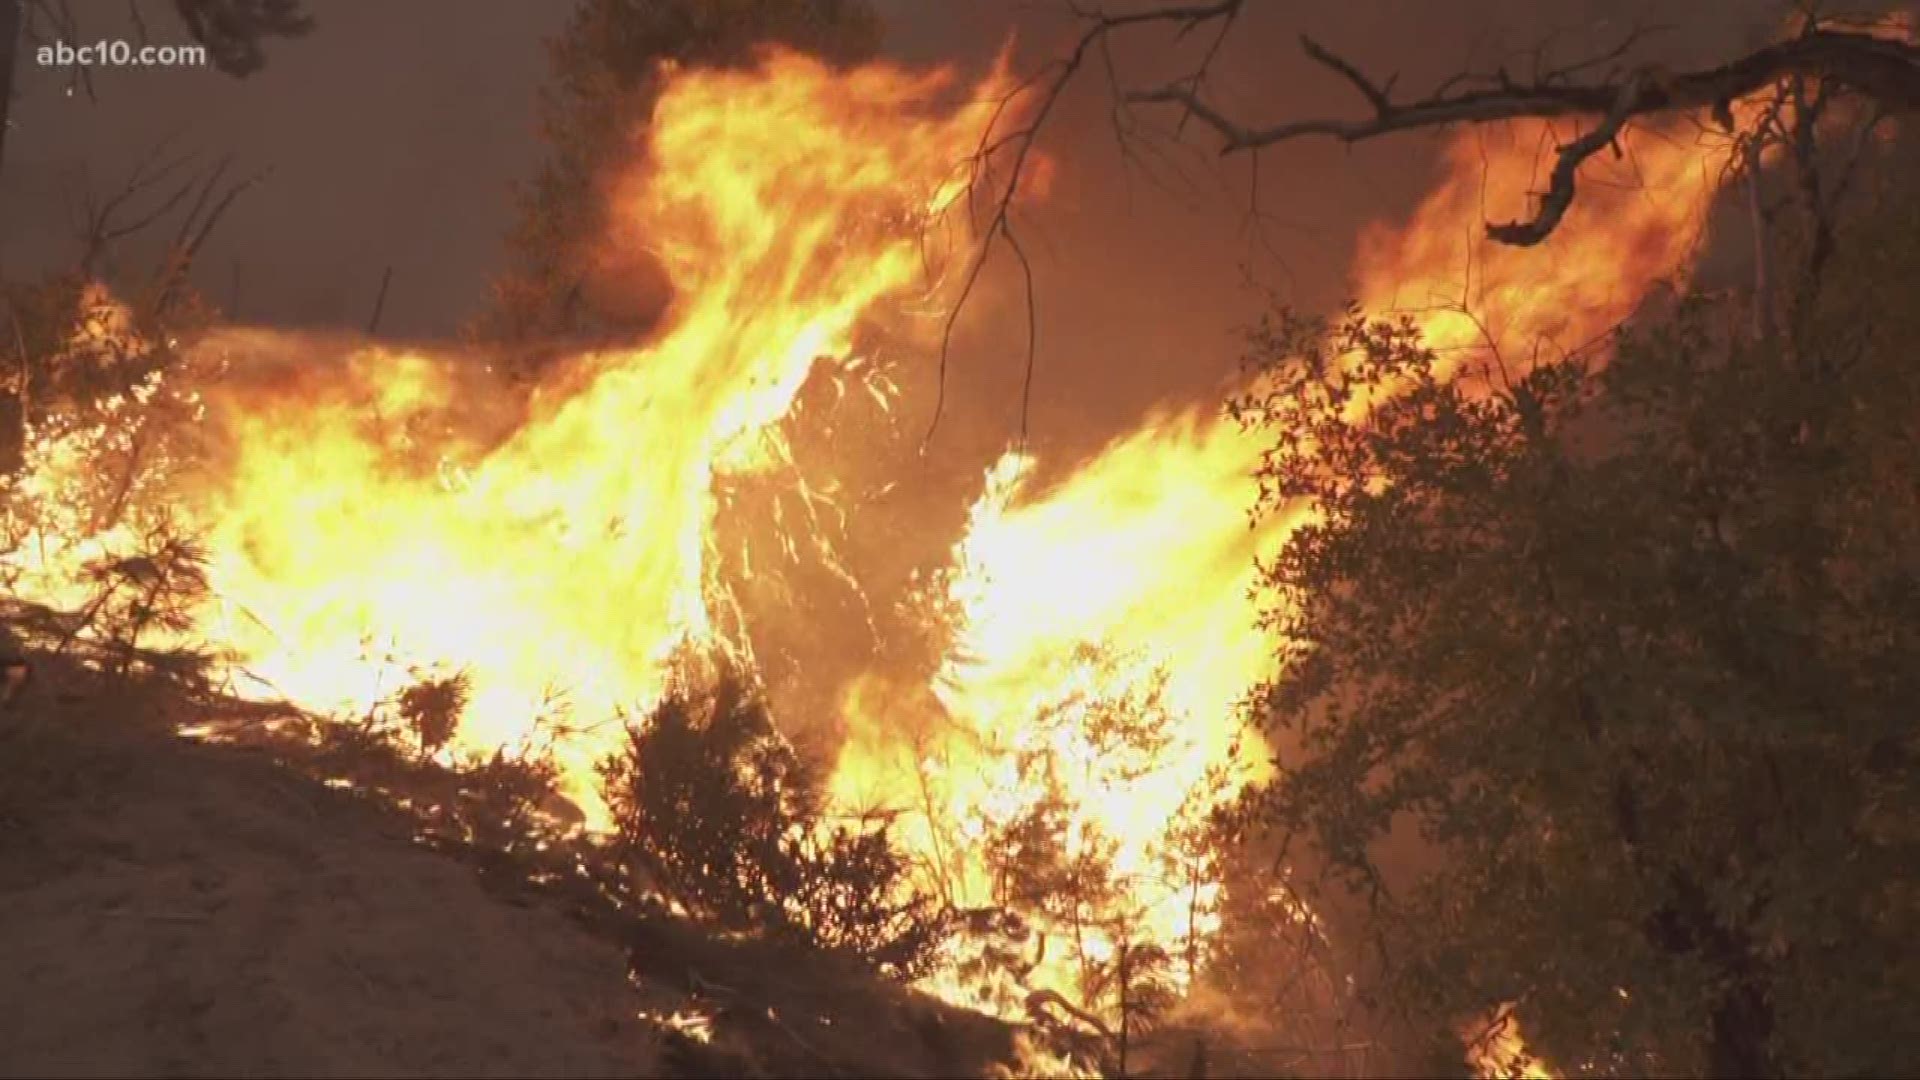 Area Republican Congressman Tom McClintock is joining President Donald Trump in calling for more clearing of trees to "stop fires from spreading."